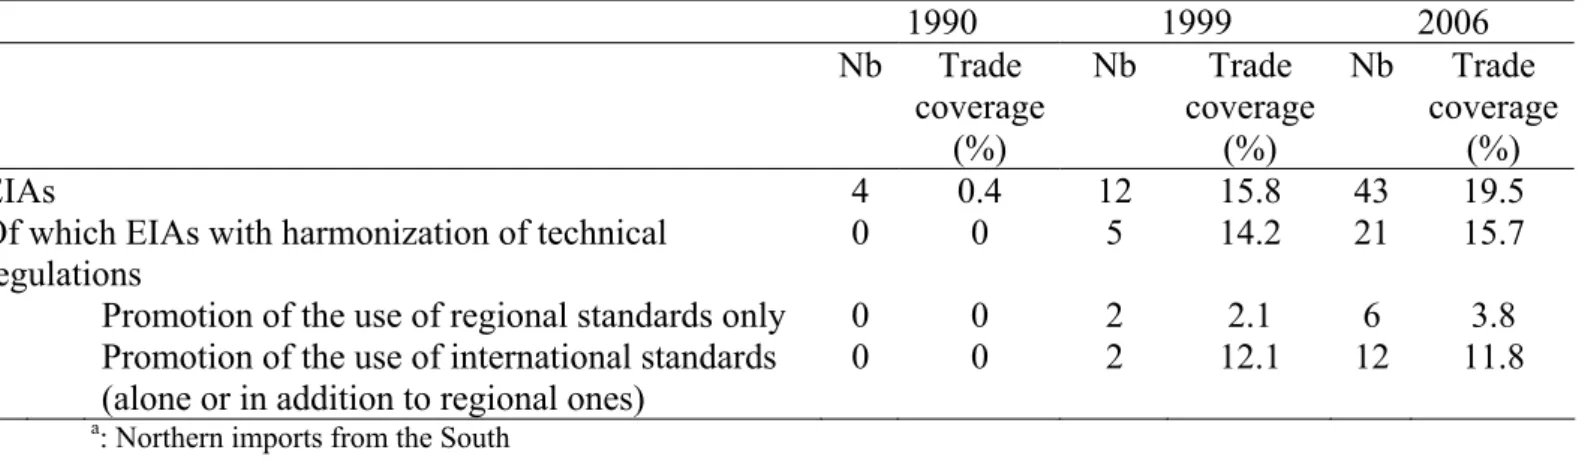 Table 1: North-South EIAs and Trade a  Coverage     1990  1999  2006   Nb Trade  coverage  (%)  Nb Trade coverage (%)   Nb Trade coverage (%)  EIAs 4  0.4  12  15.8  43  19.5 